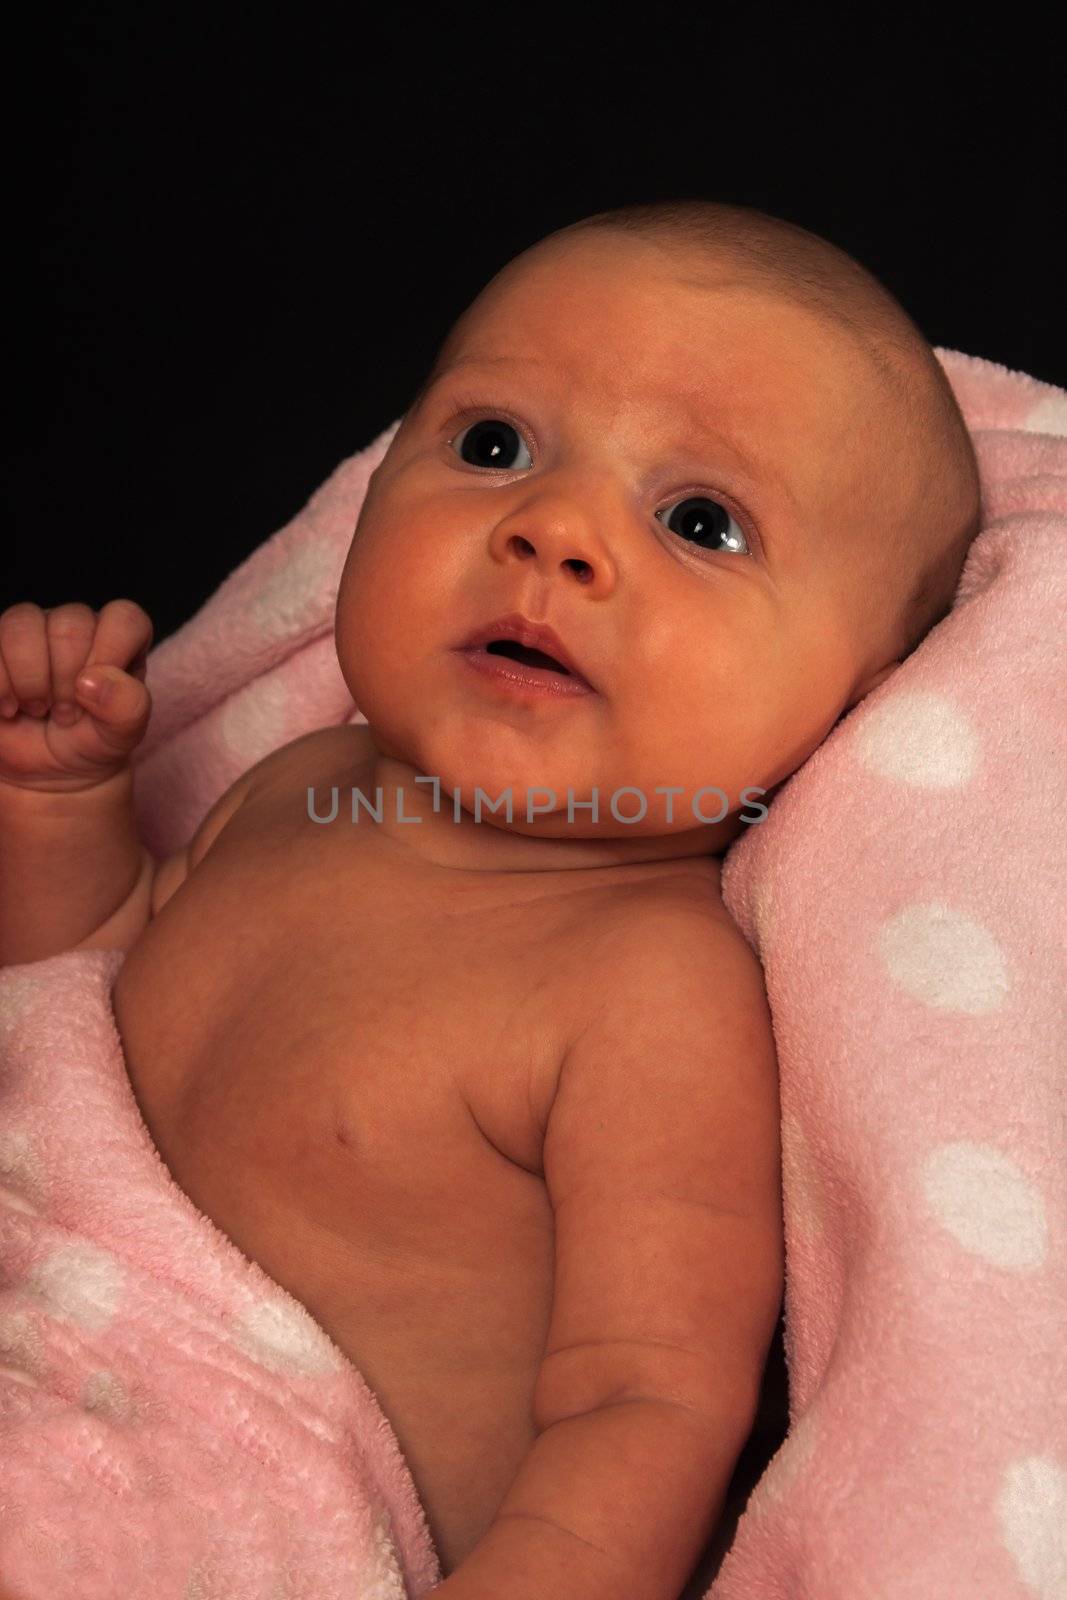 infant wrapped in a blanket on a black background. by sk11303